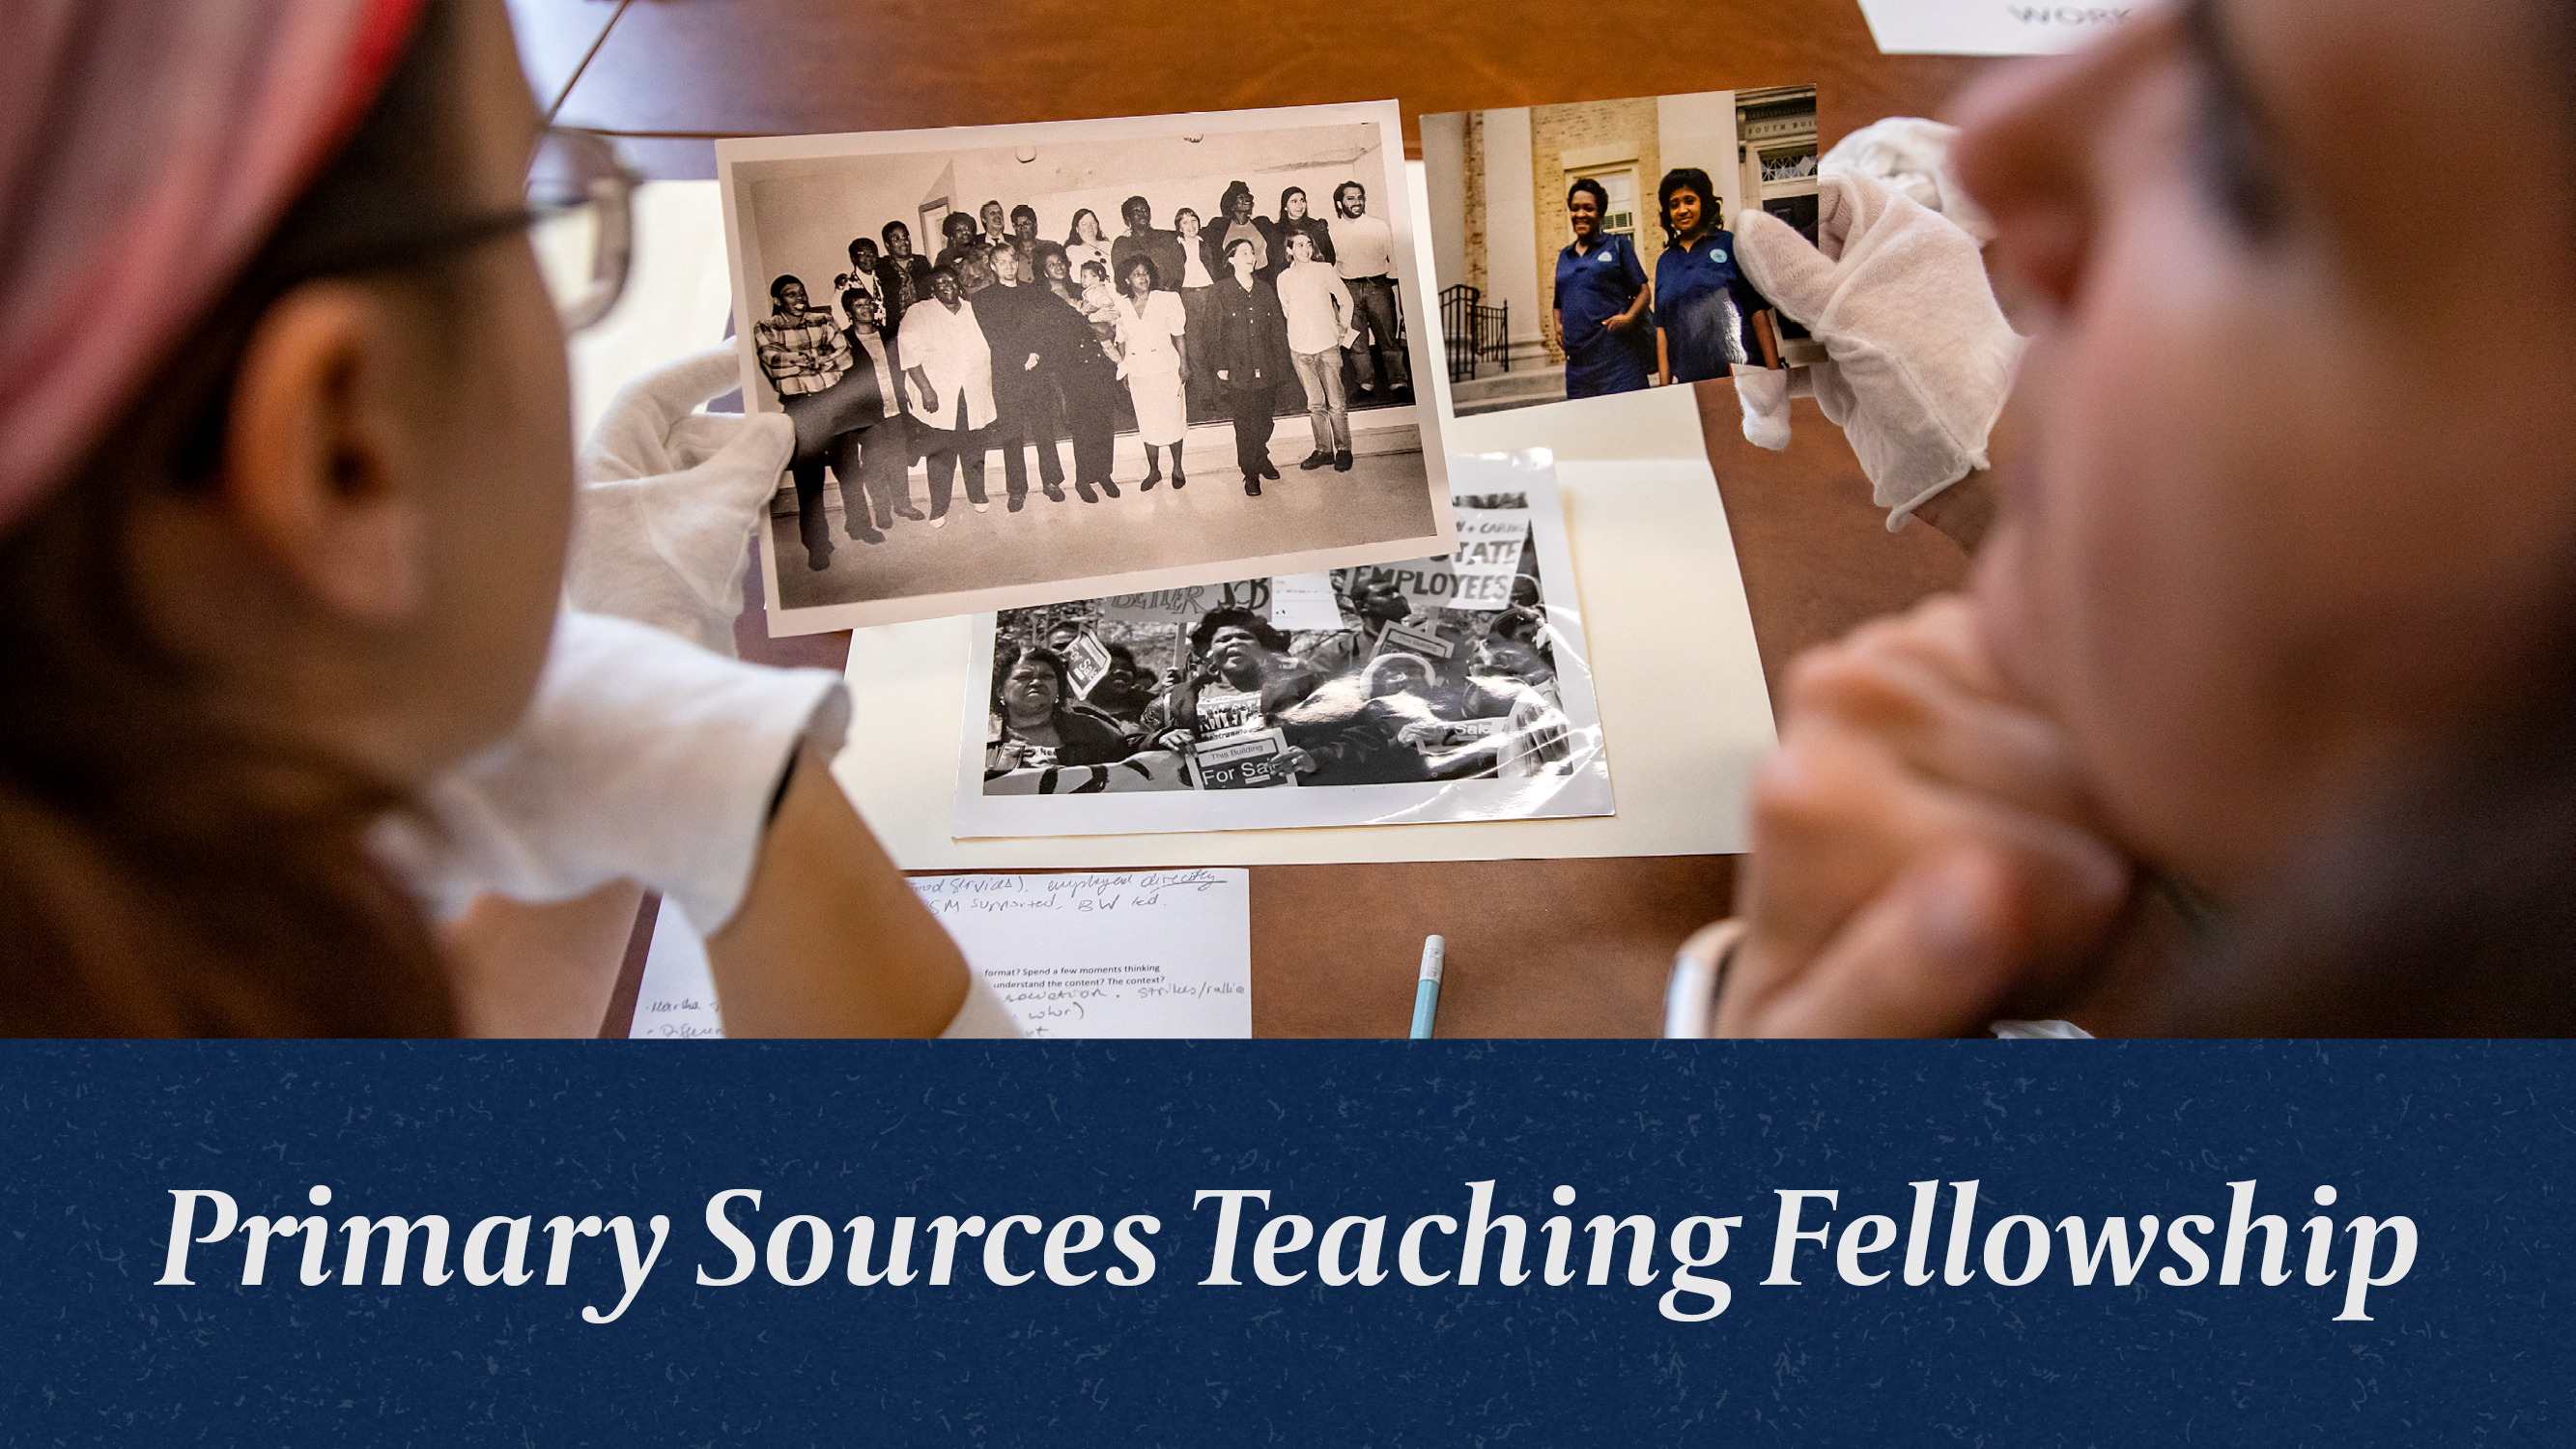 Reflecting on Year One of Wilson Library’s Primary Sources Teaching Fellowship